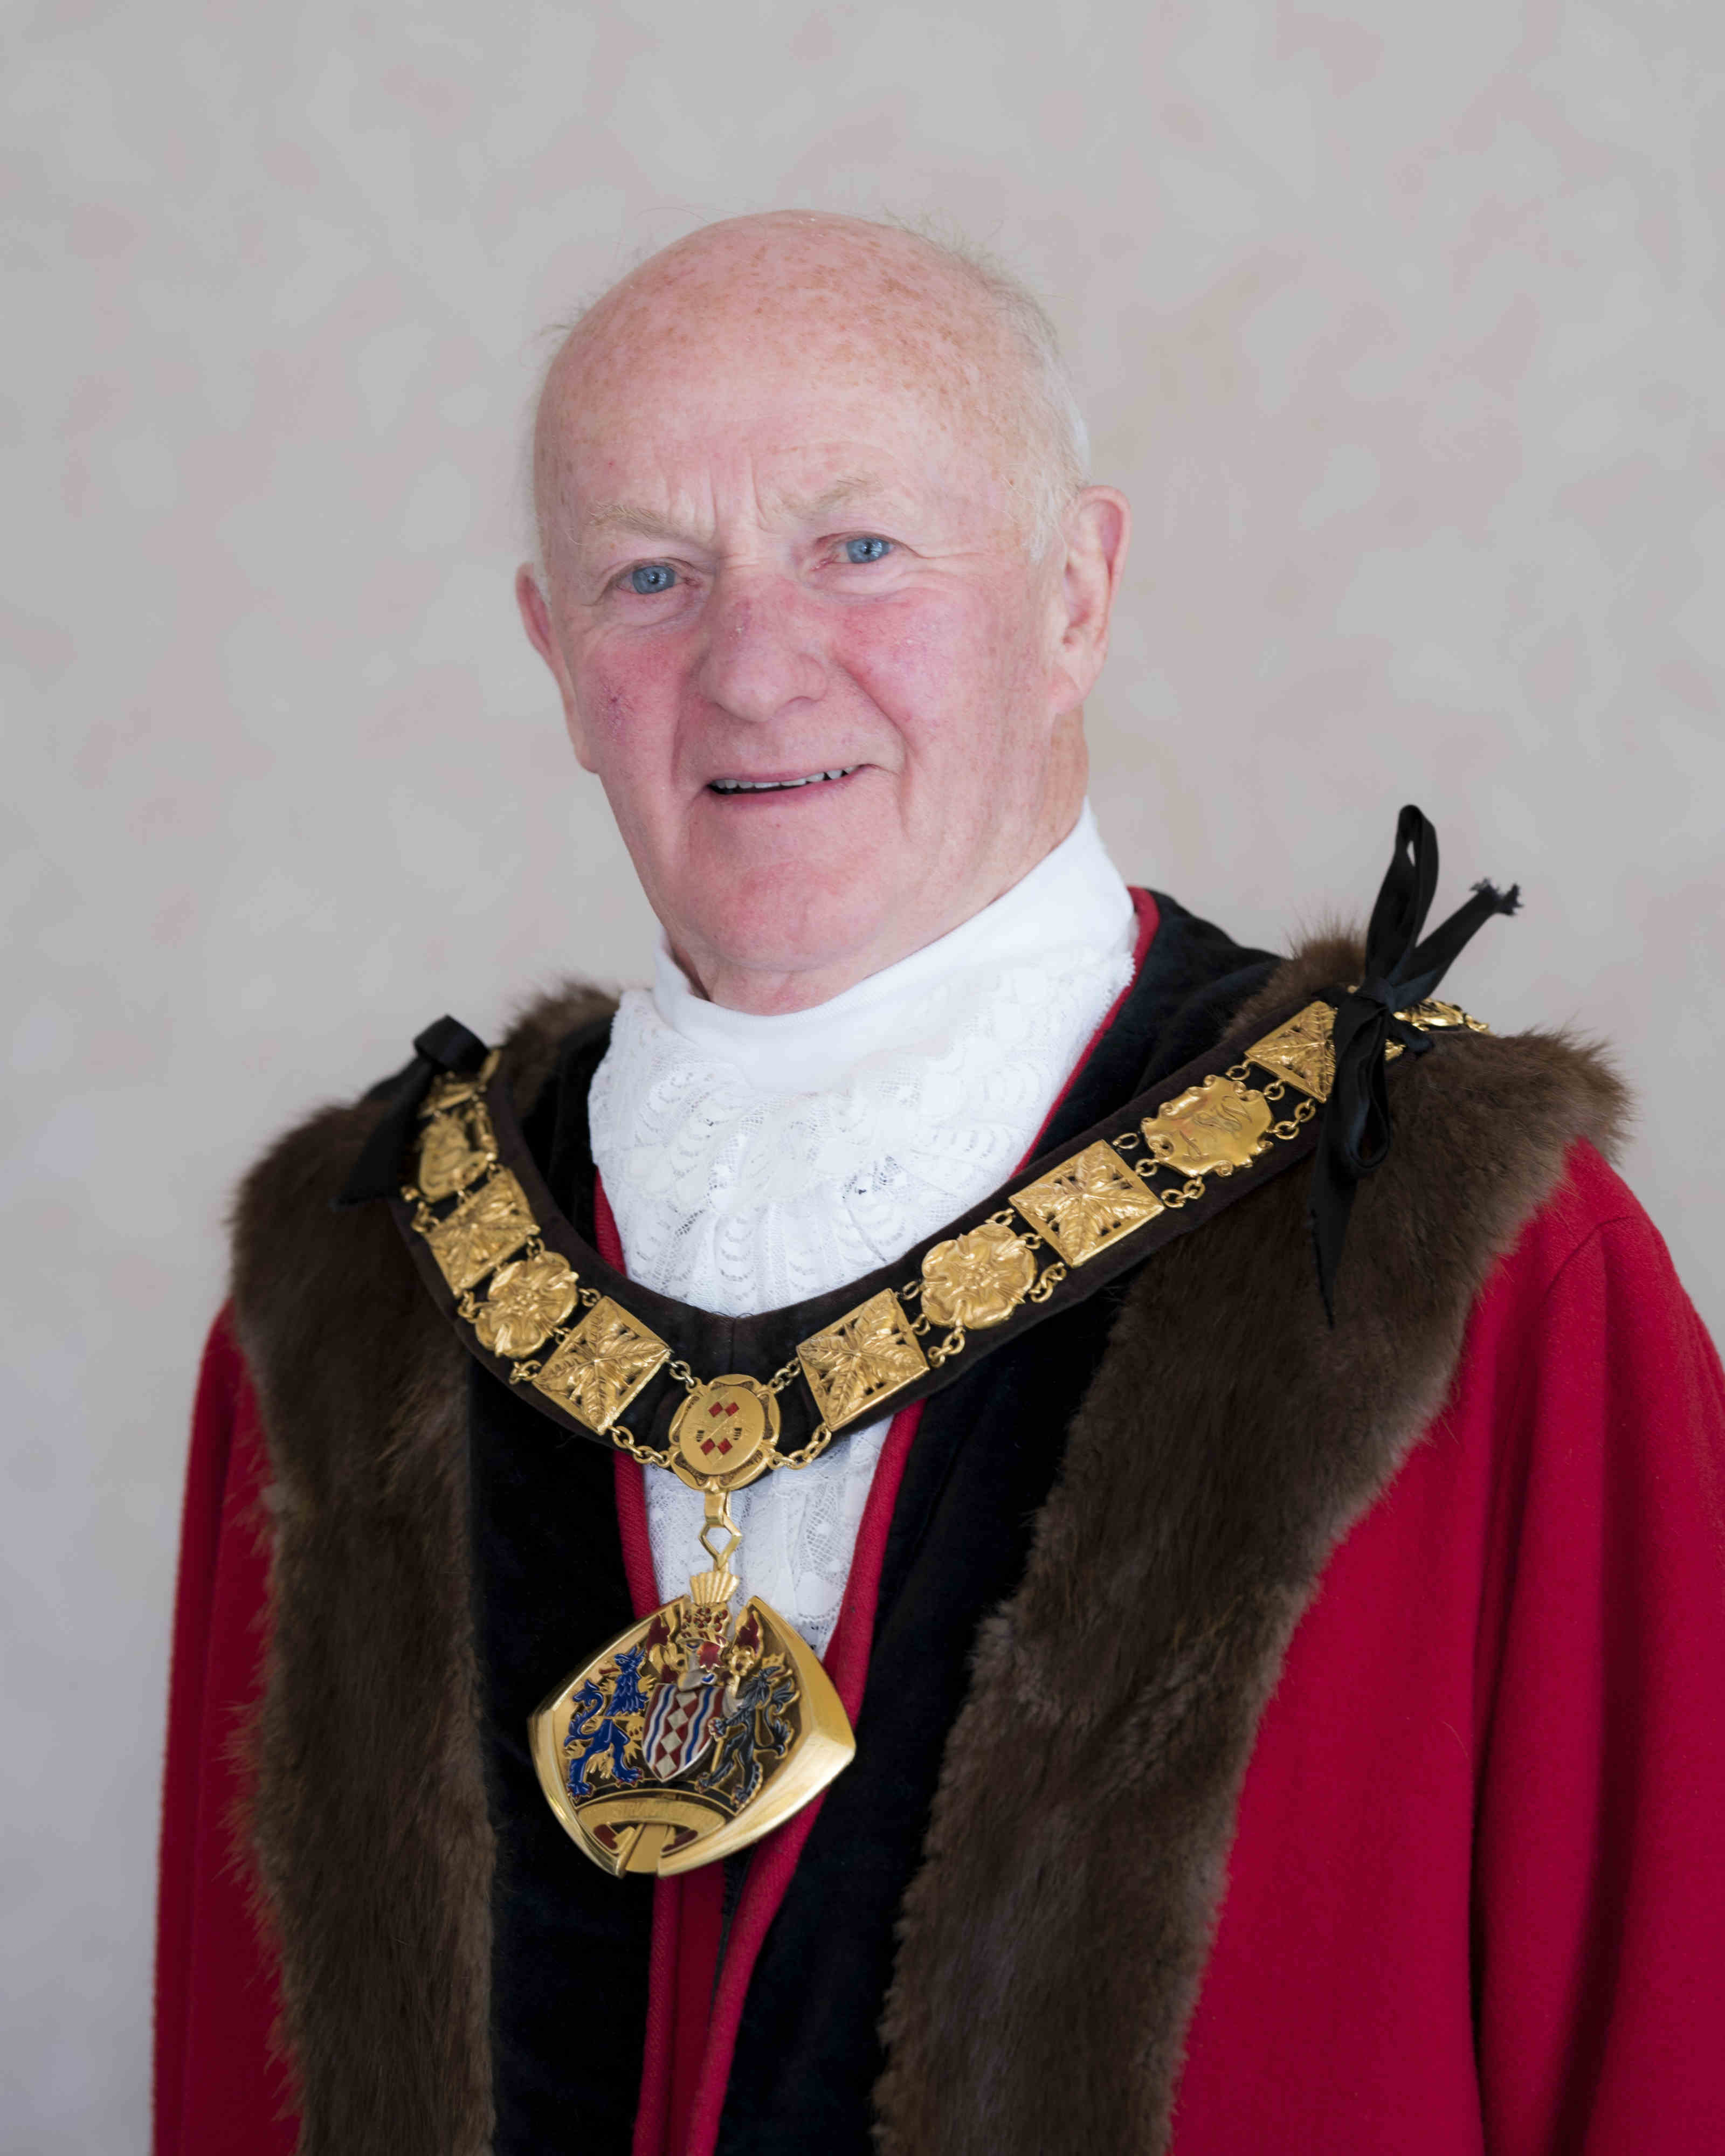 Join Halton’s Mayor for top-notch charity show